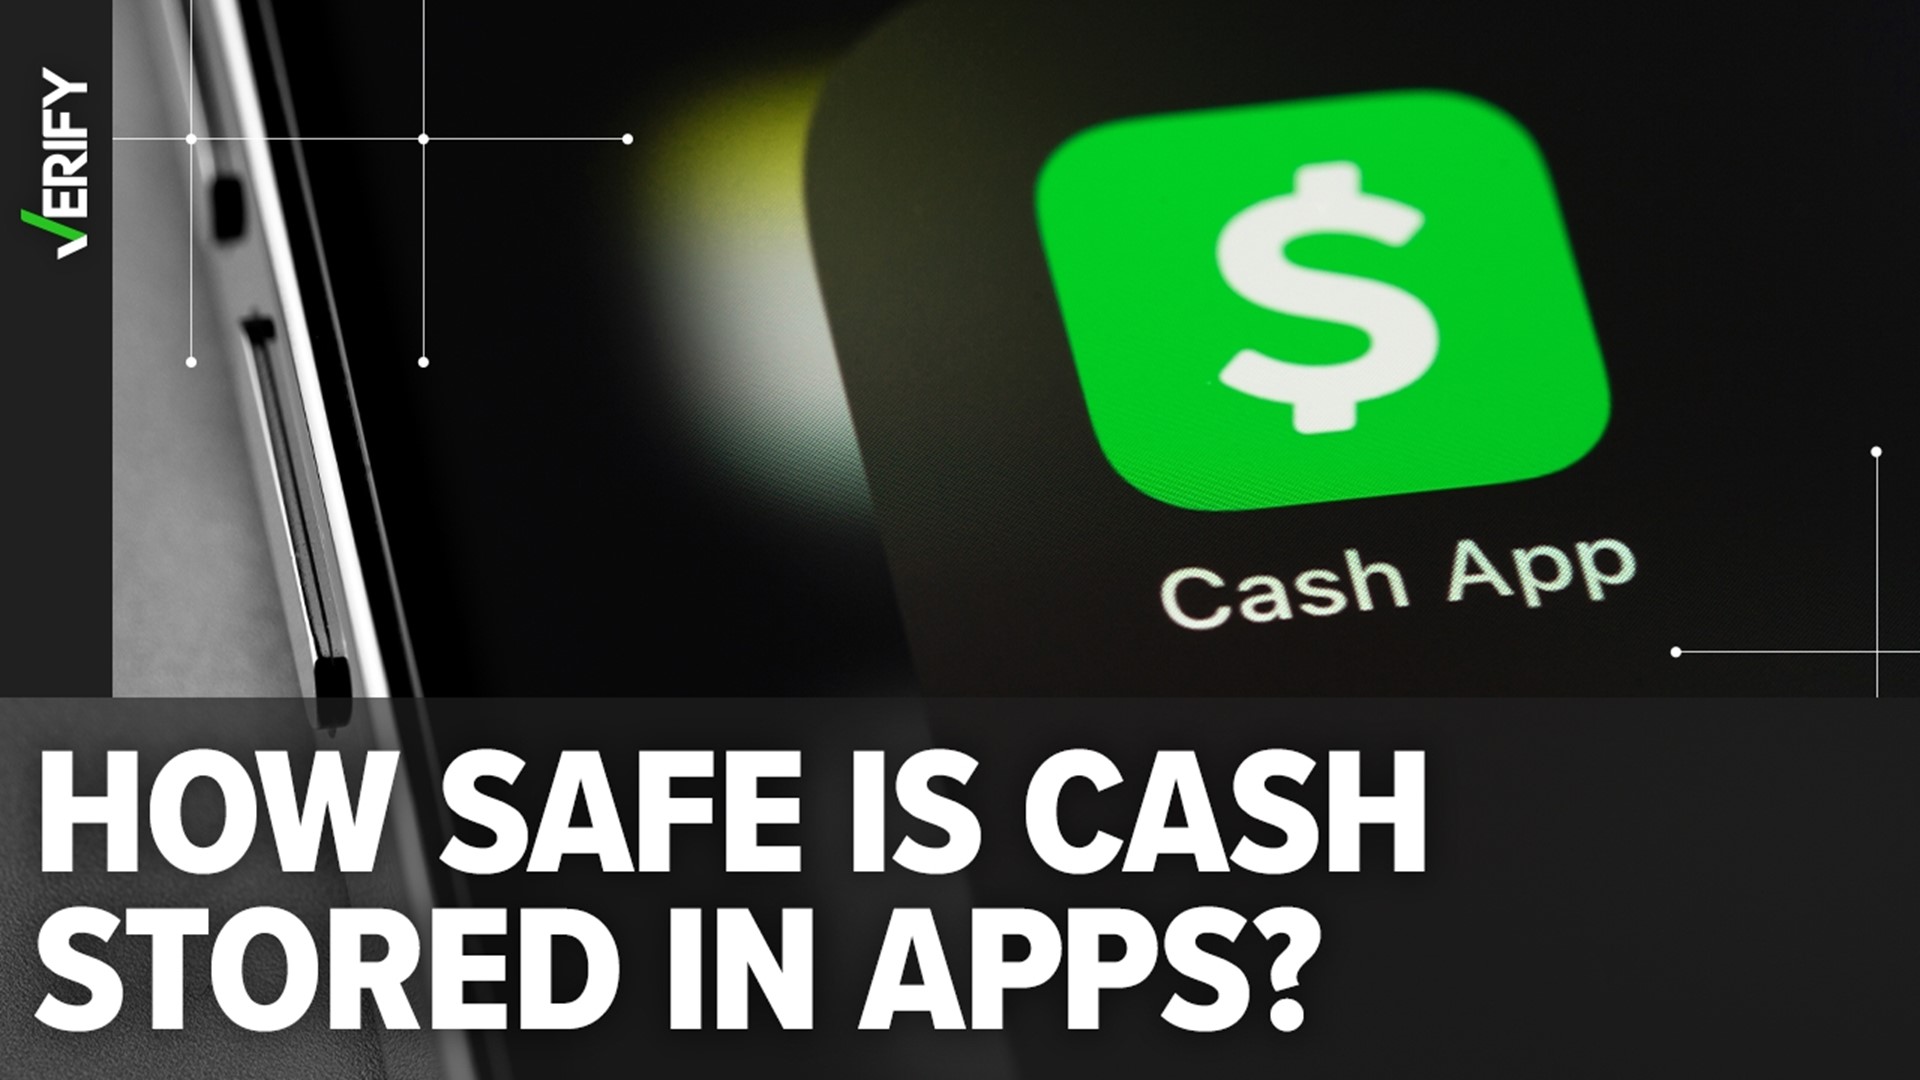 Payment apps like Cash App, PayPal and Venmo lack federal deposit insurance coverage. Money stored on these apps may not be safe during a financial crisis.